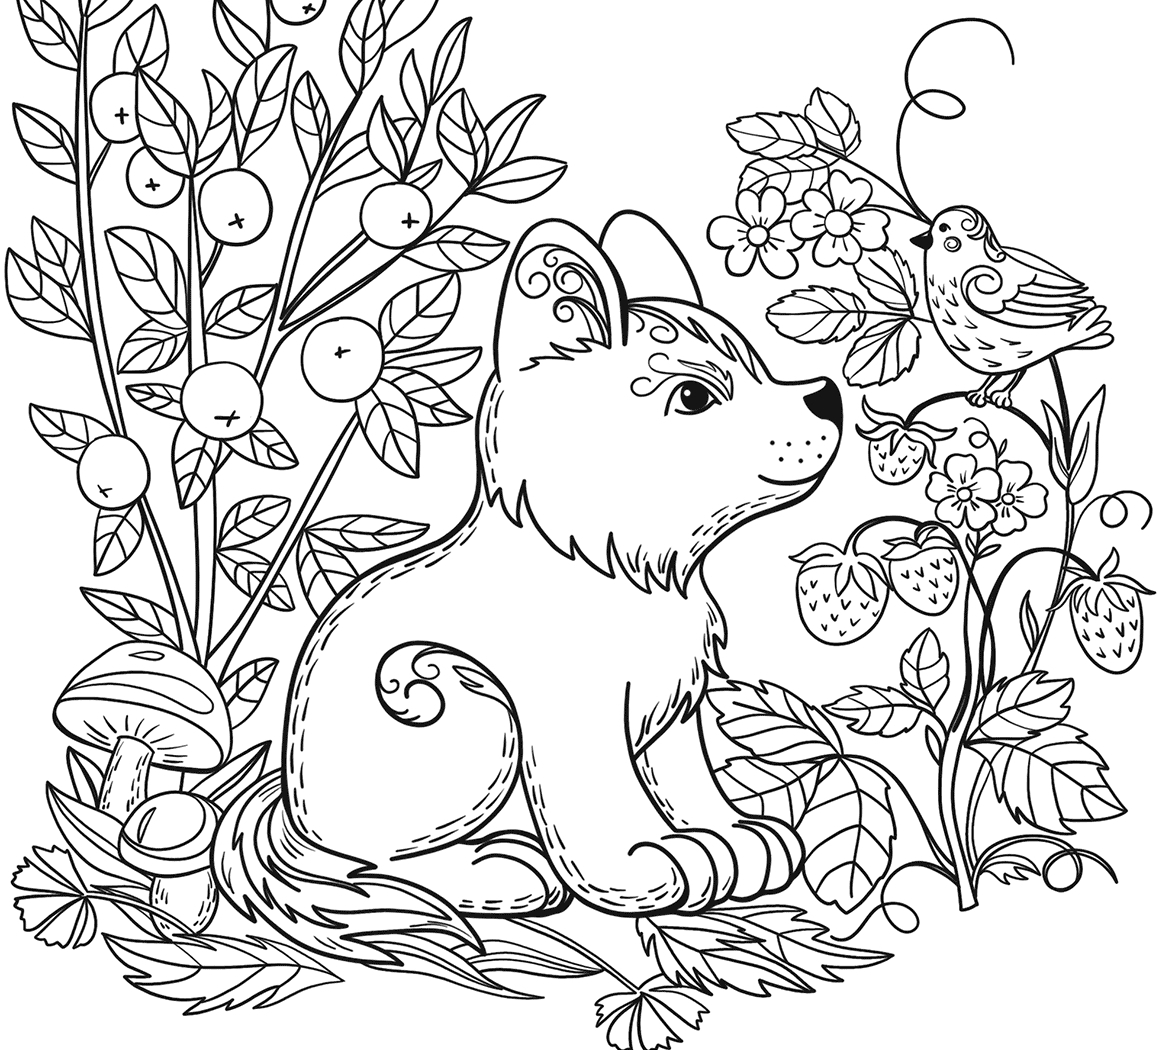 Free Wild Animal Coloring Pages At GetColorings Free 